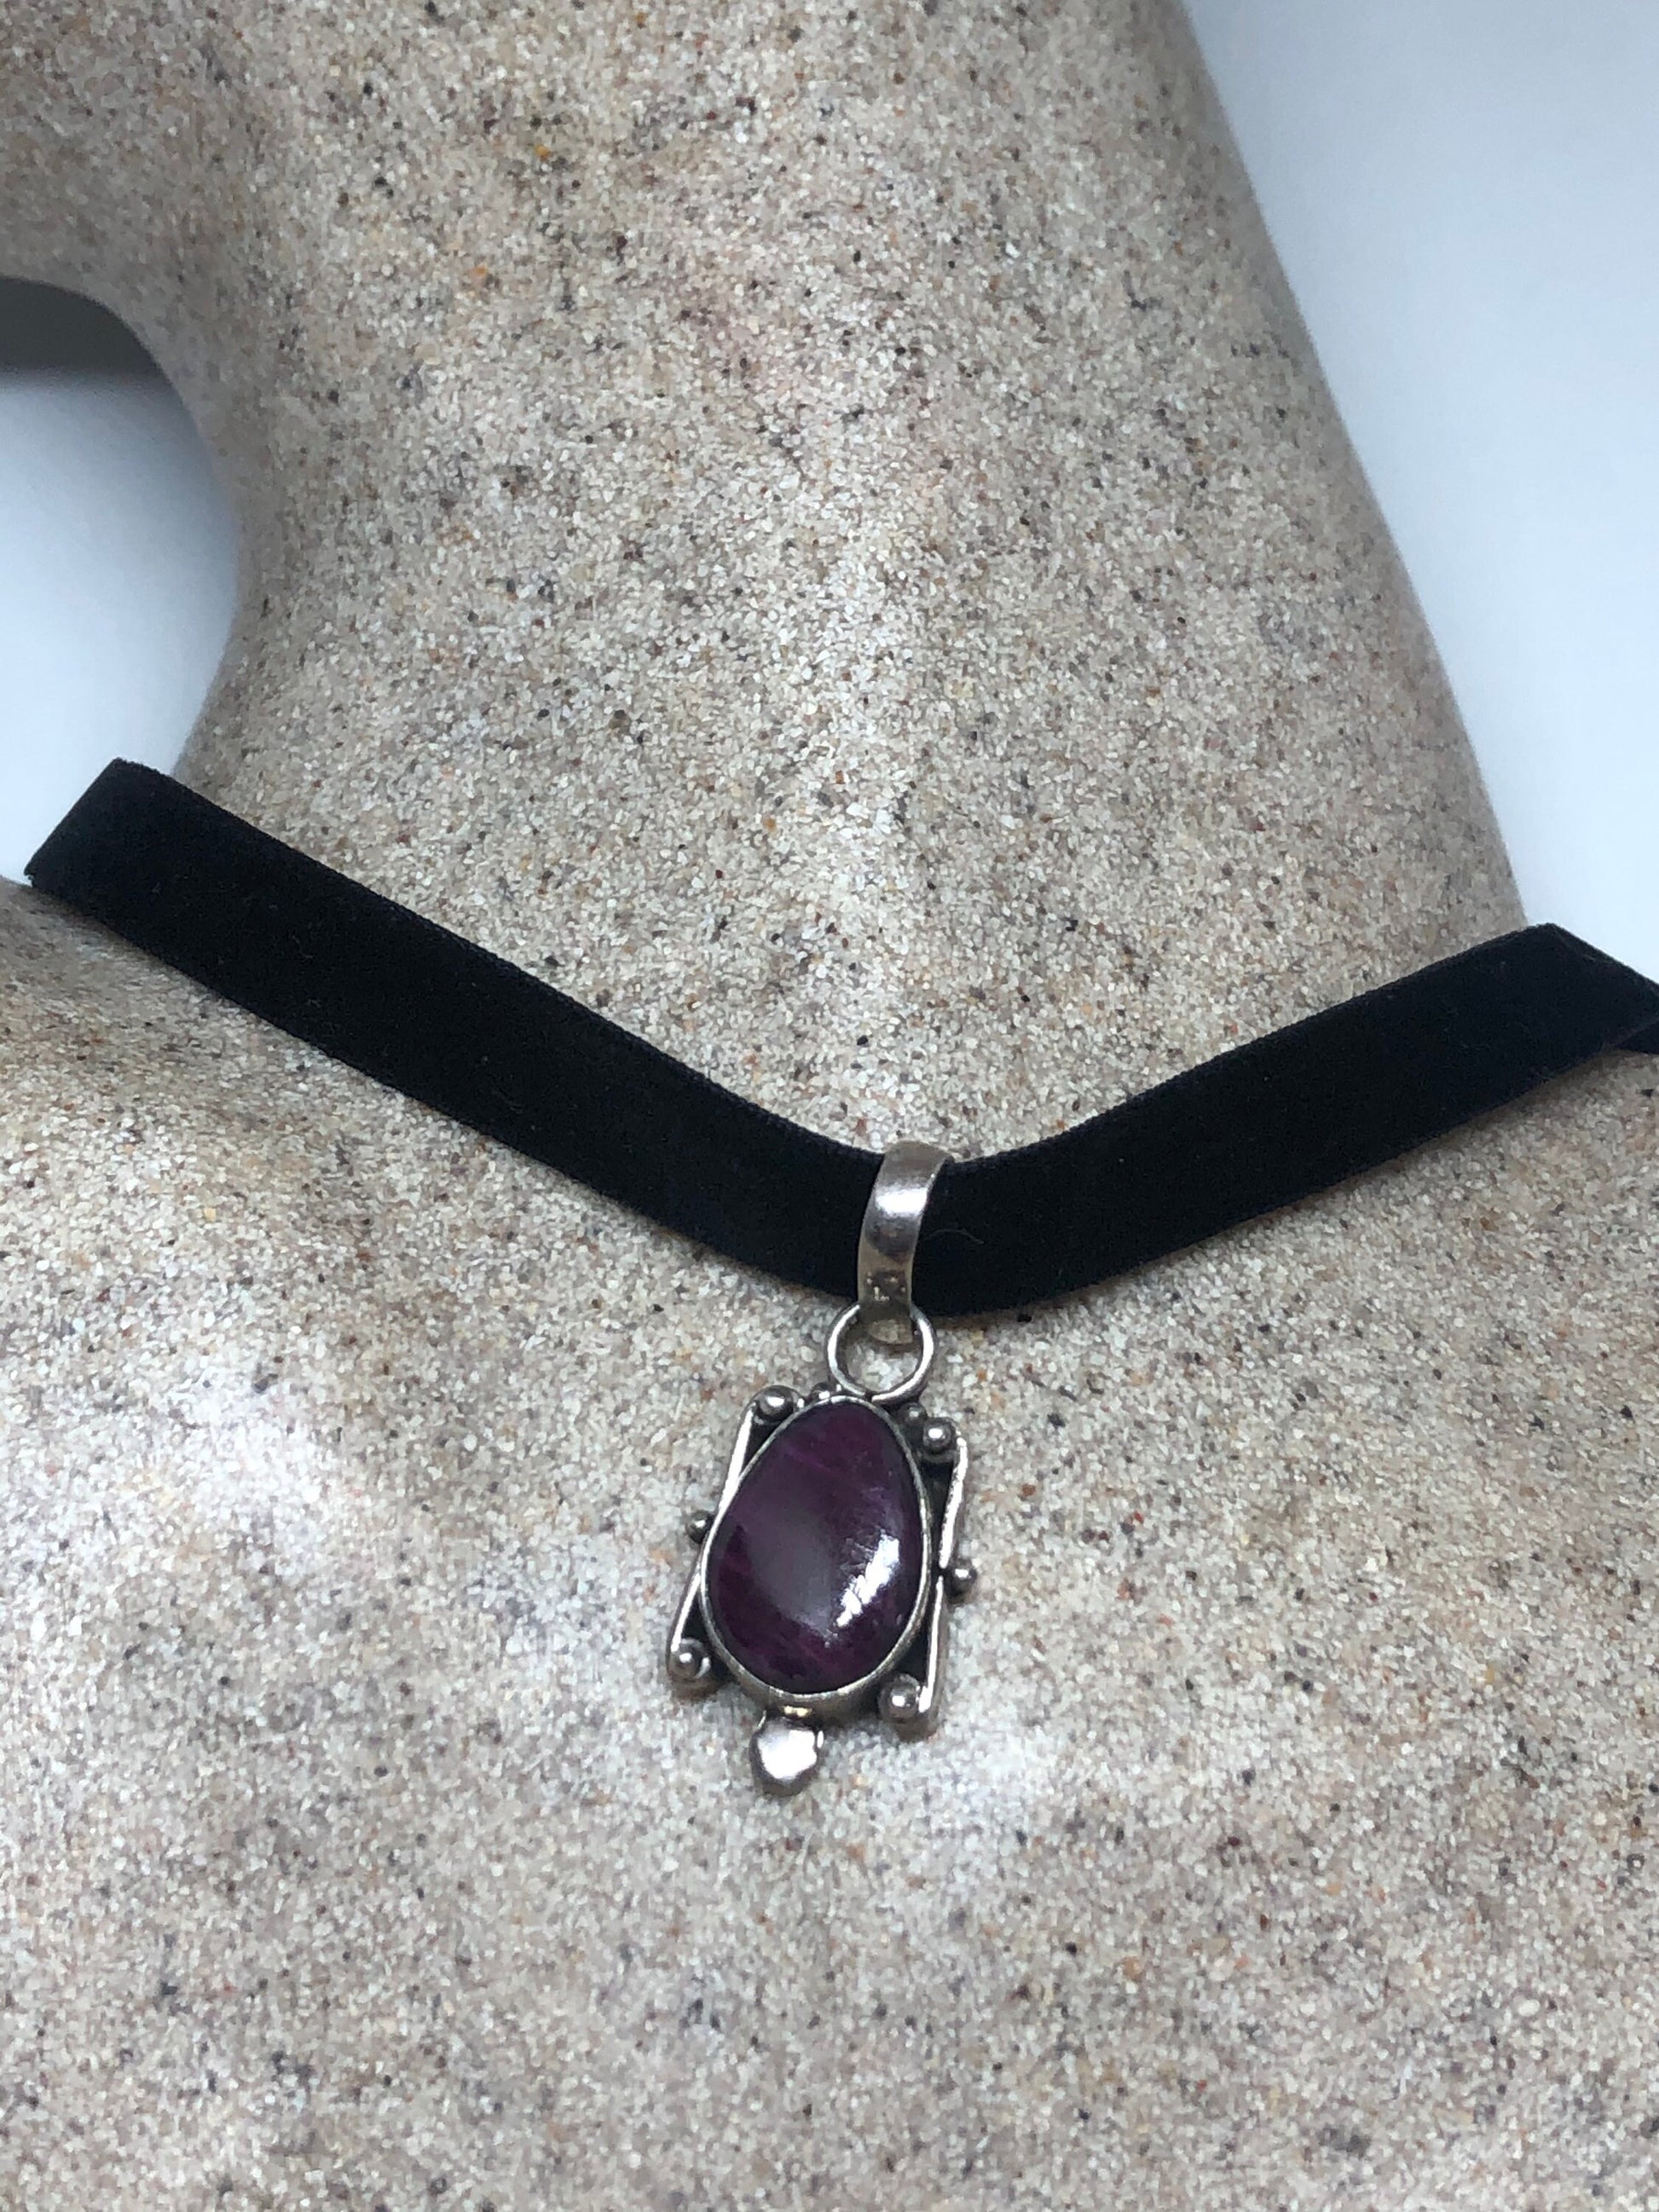 Vintage Pink Raw Ruby Choker 925 Sterling Silver Pendant Necklace